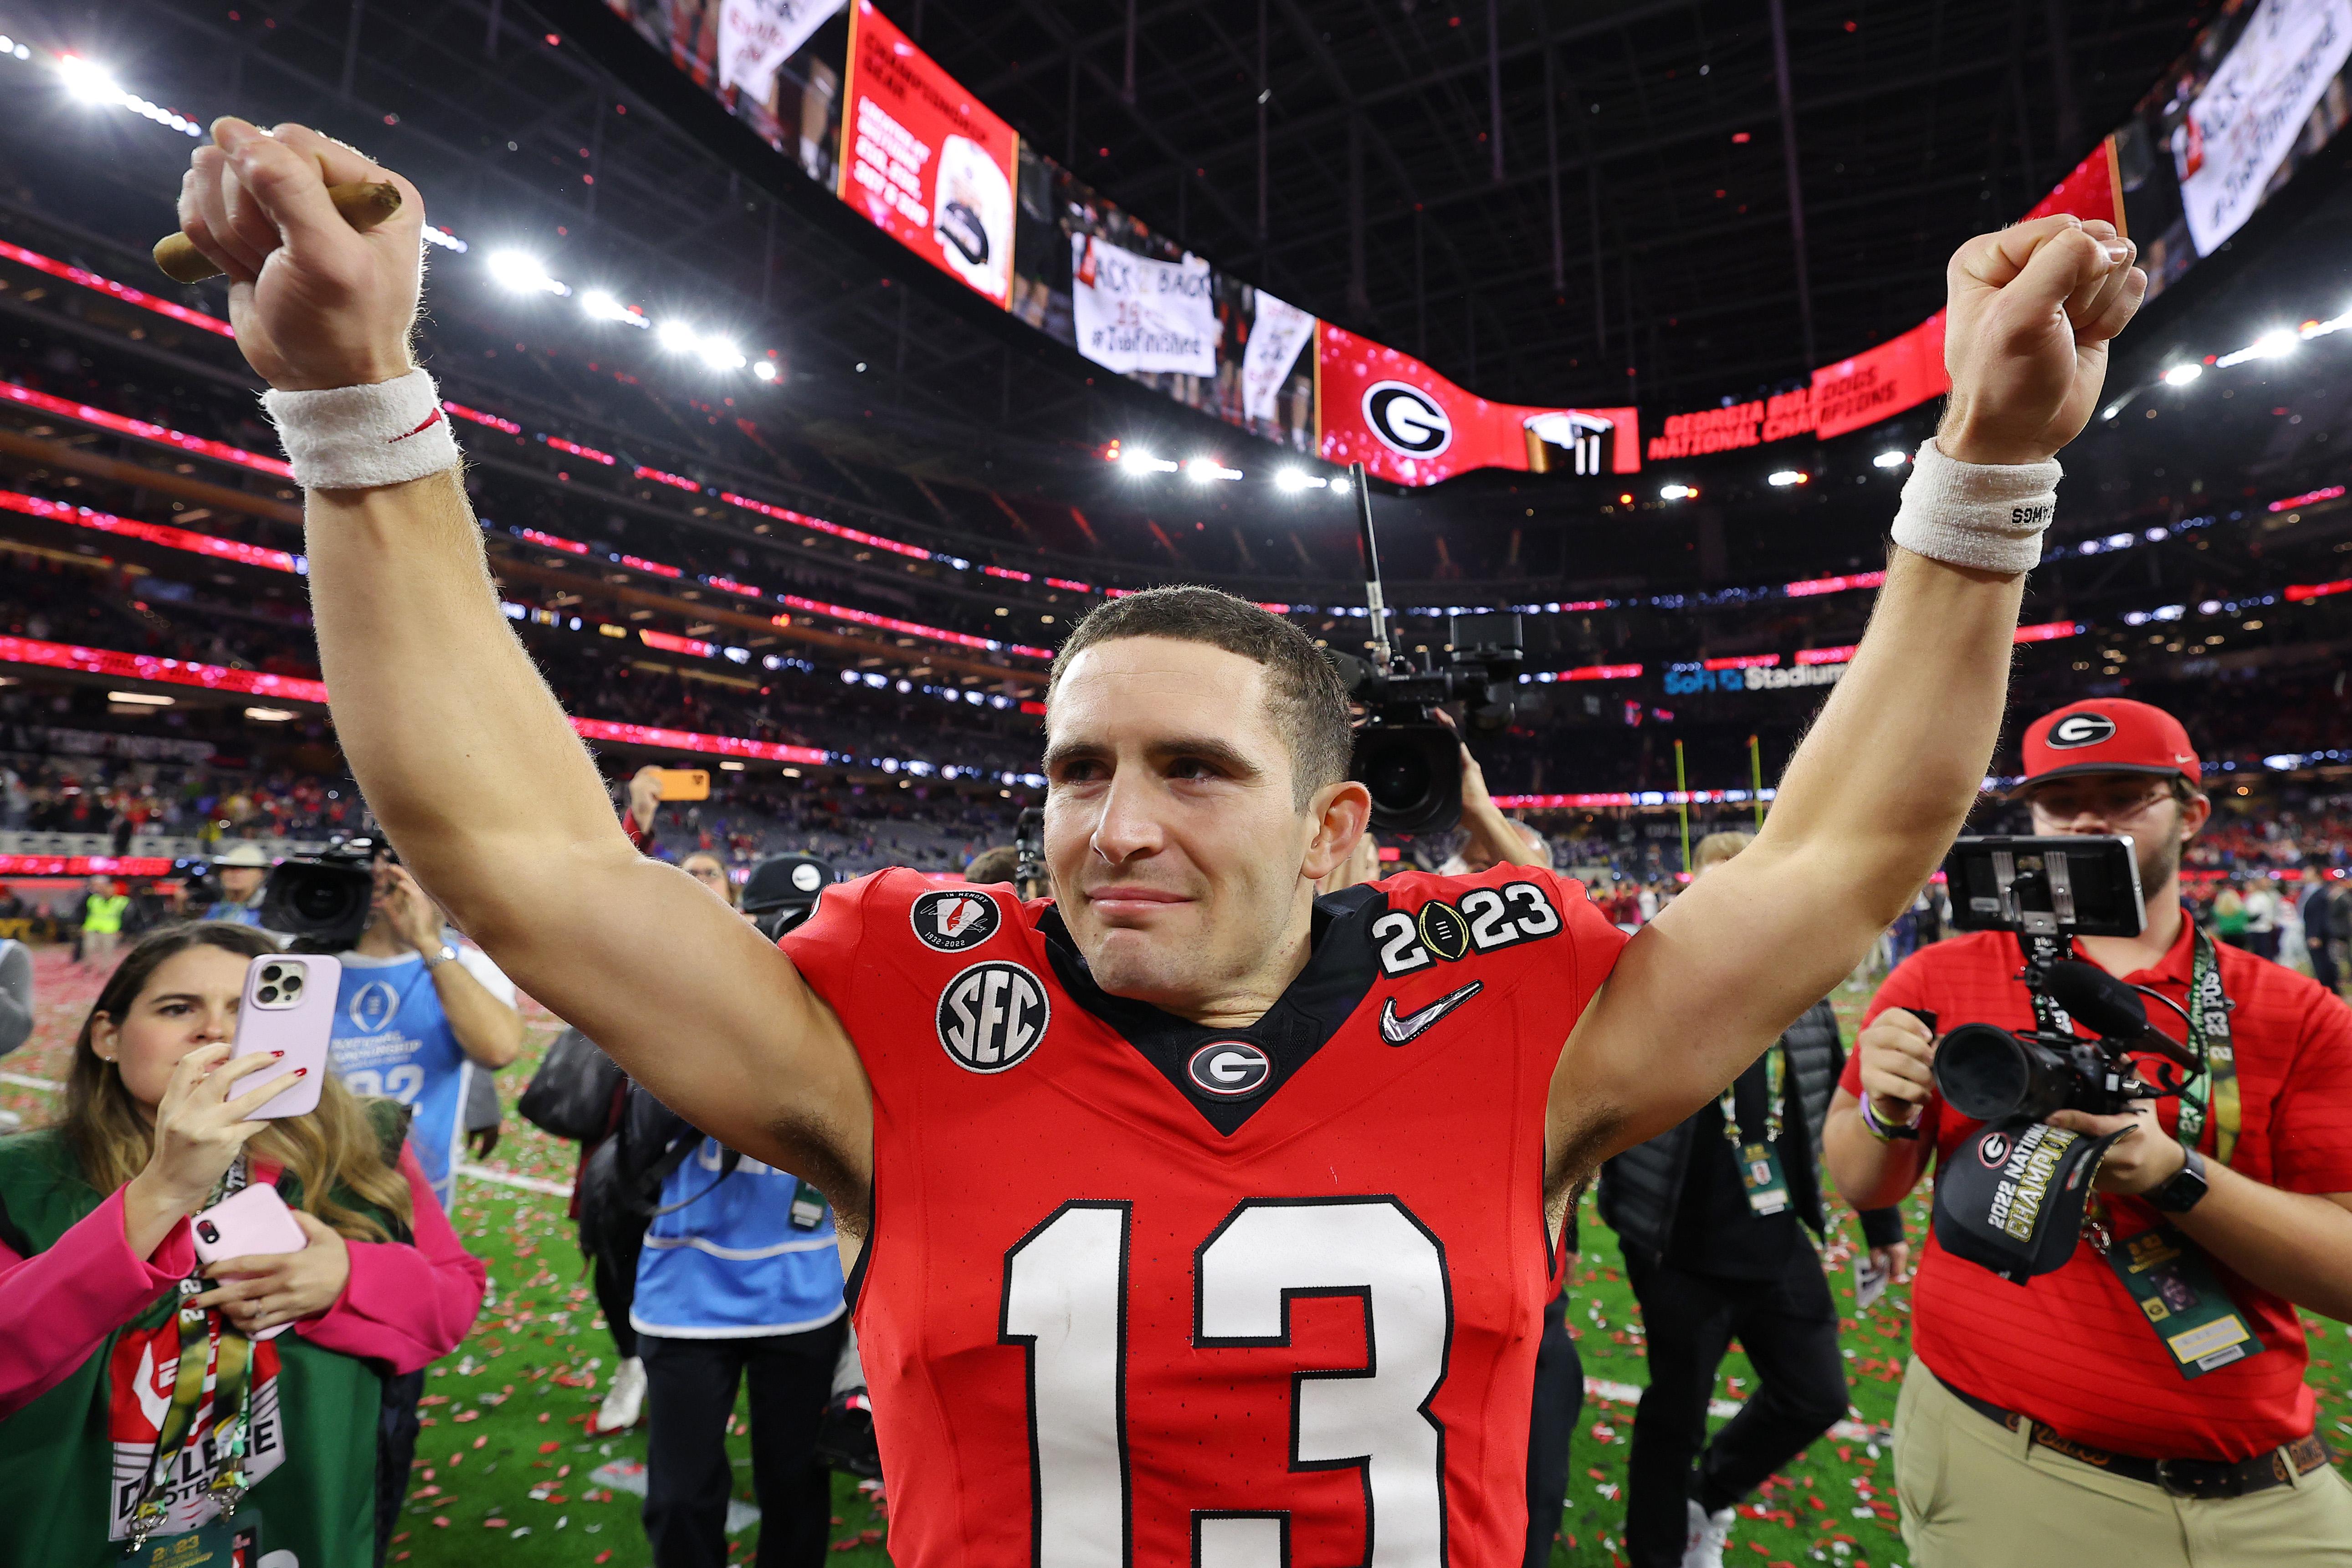 Bennett, helmet off, raises his fists in triumph with confetti on the field under him and a Georgia G hanging on a banner behind him.